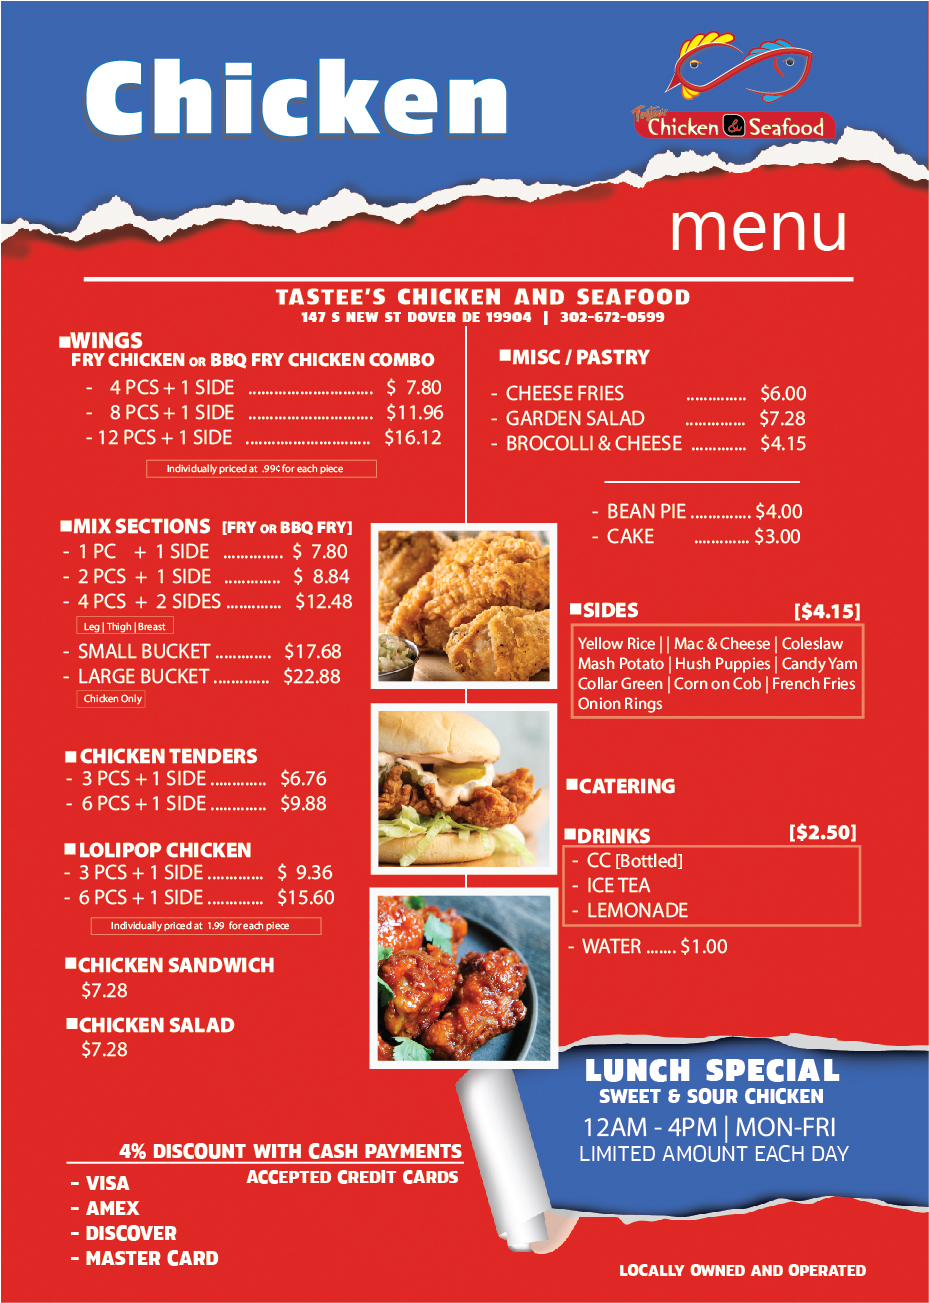 Tastees Chicken and Seafood | restaurant | 147 S New St, Dover, DE 19901, USA | 3026720599 OR +1 302-672-0599